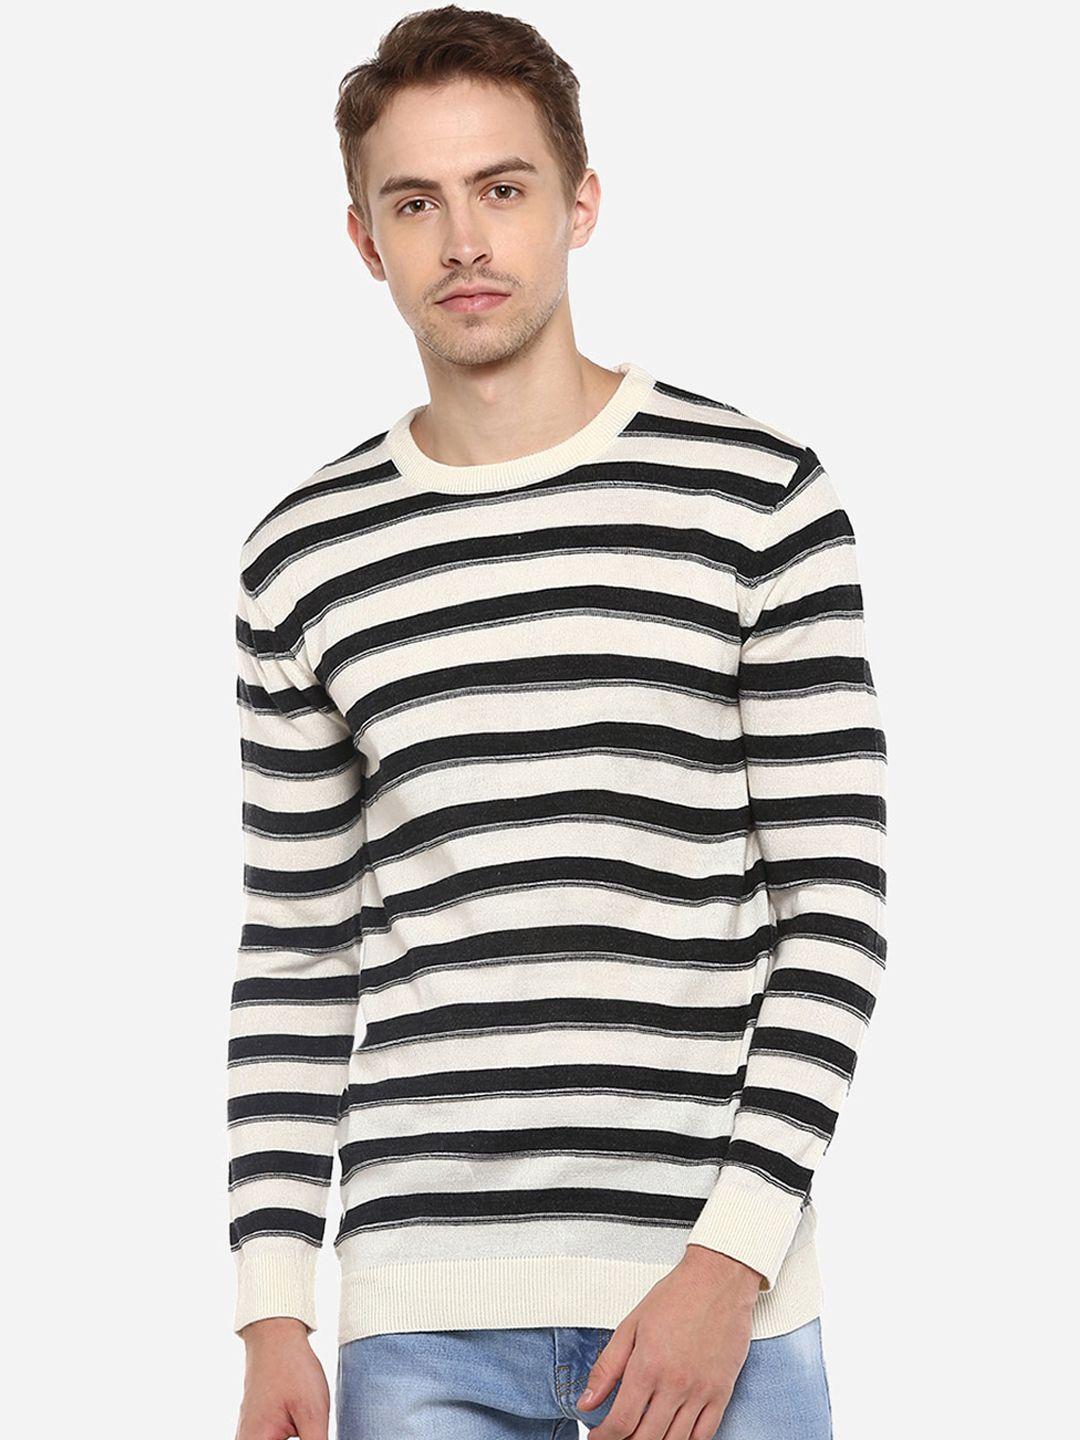 red chief men acrylic black and white striped sweater